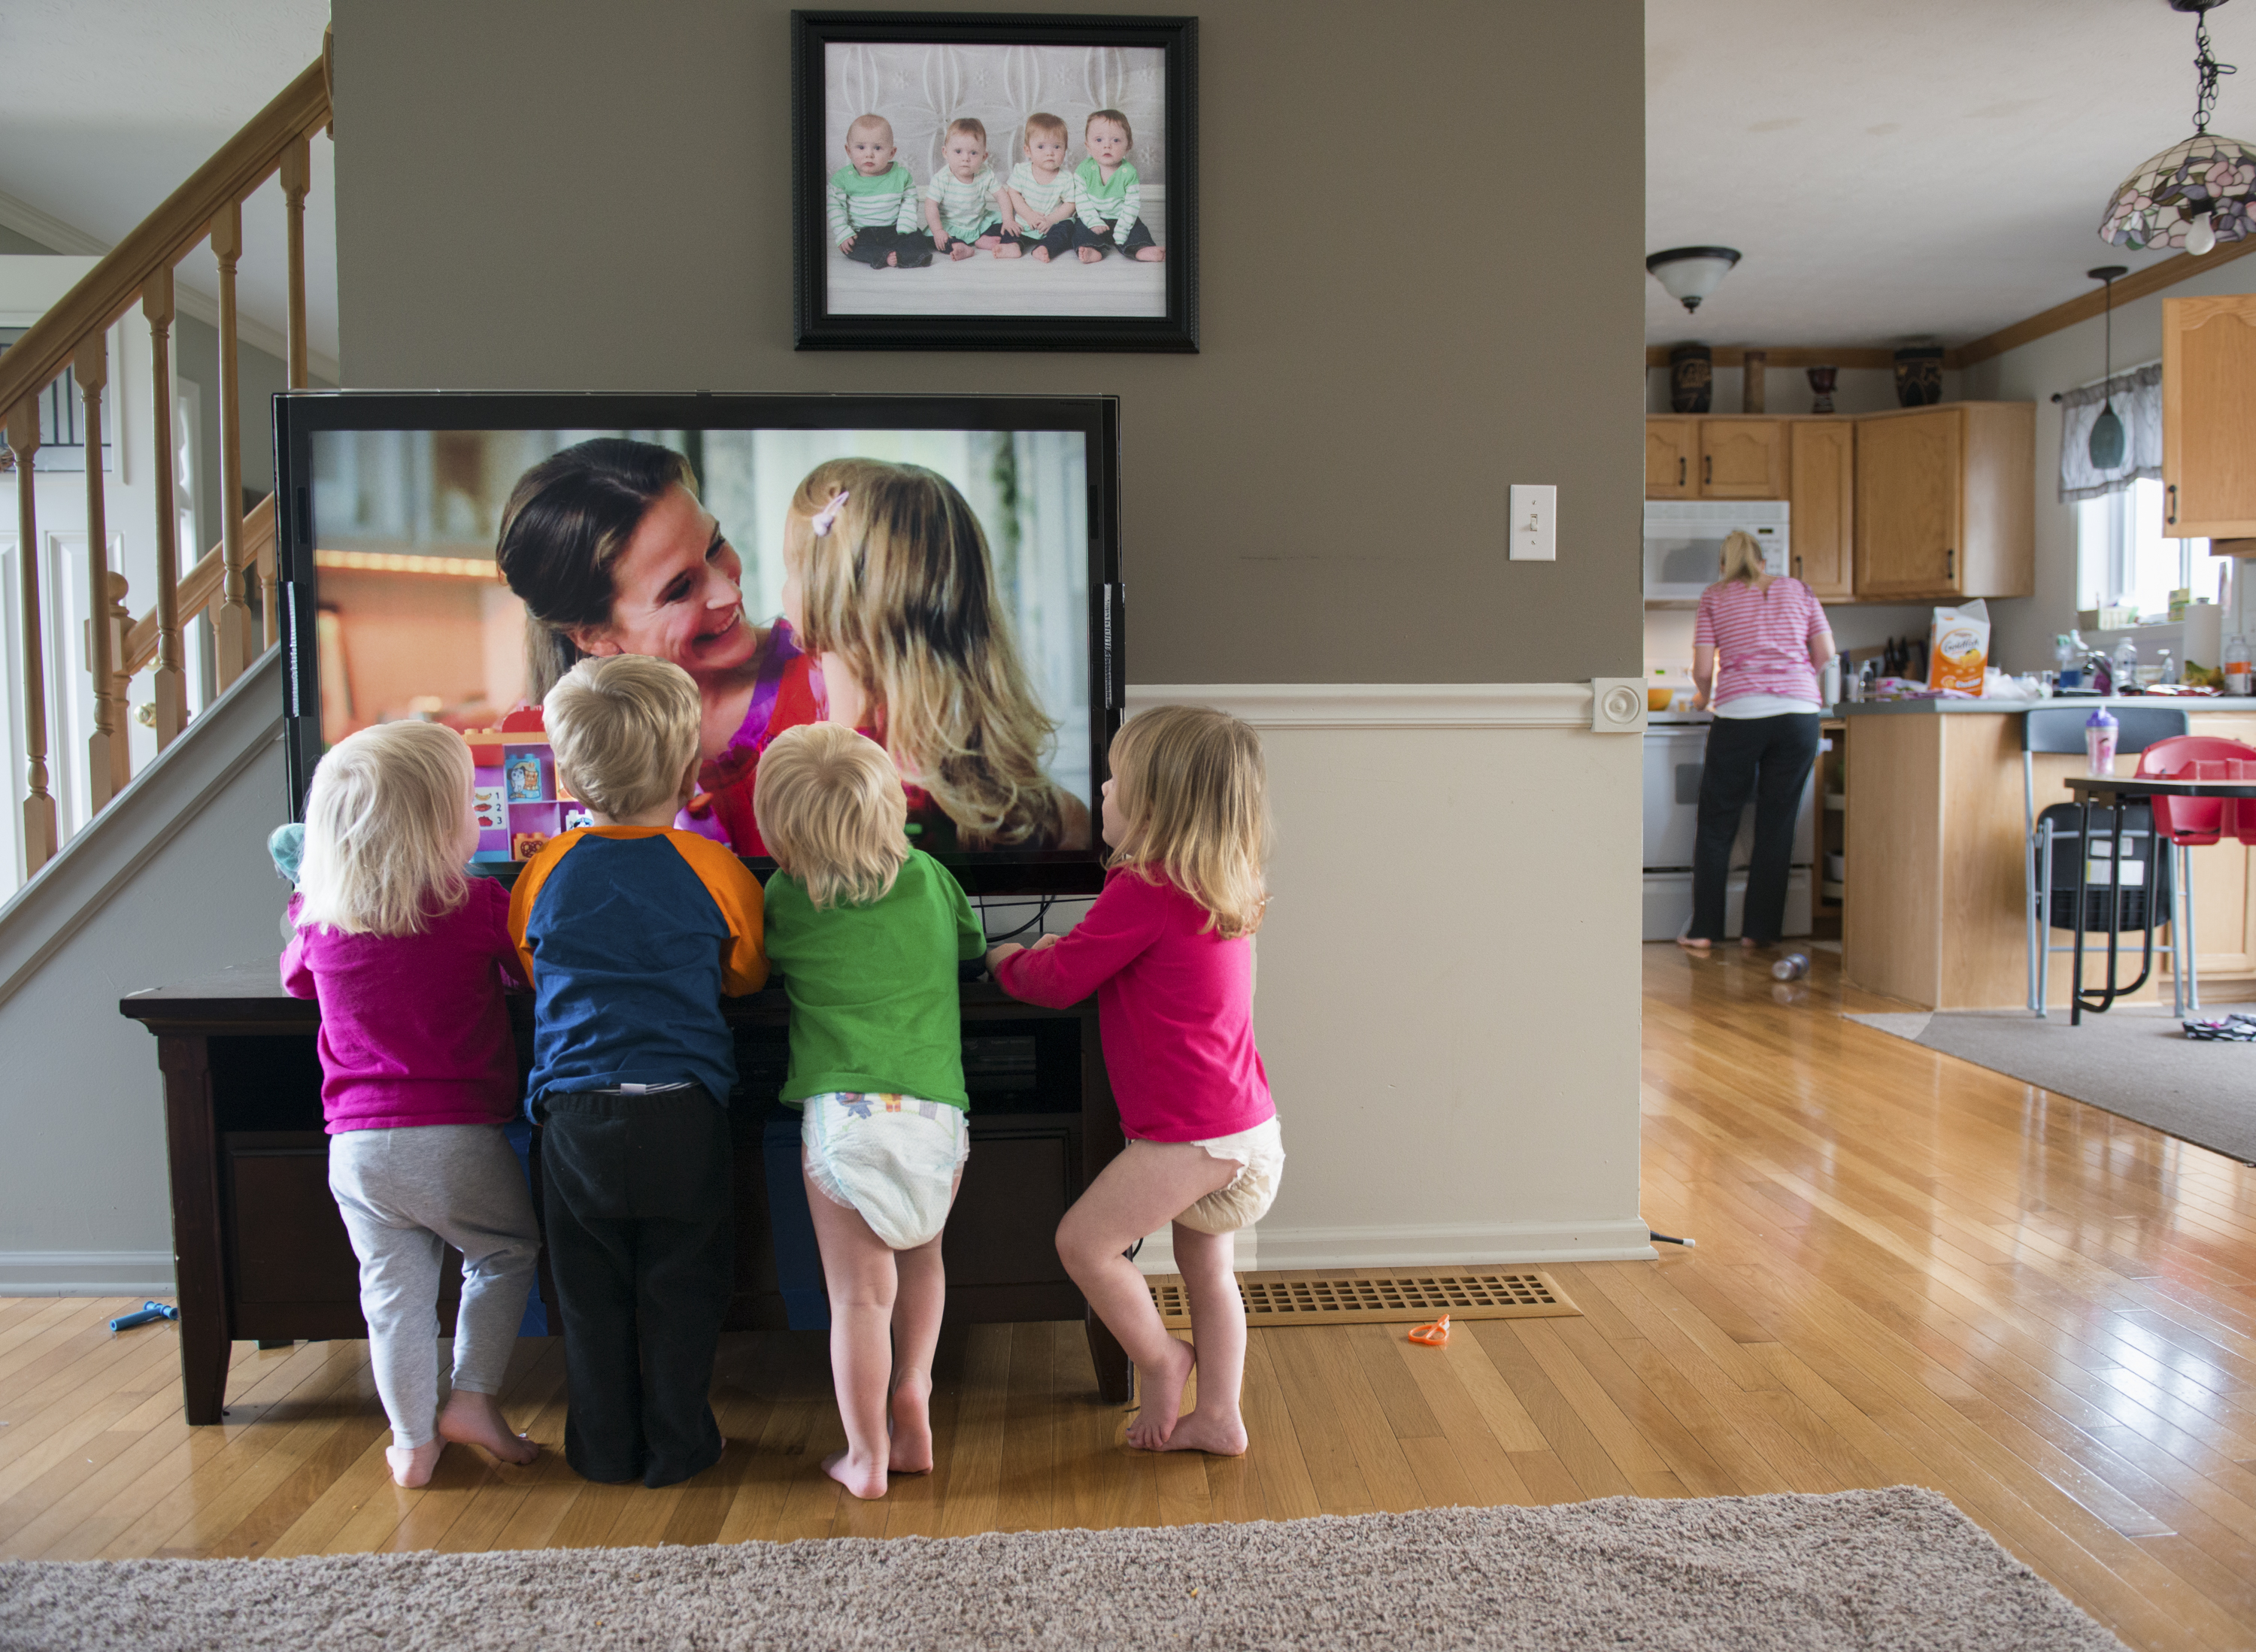 The Larson quadruplets (Left to Right) Ashlyn, Brody, Cooper, and Kylie watch television as Courtney prepares a snack for them in the kitchen. Courtney often turns on the television to distract the children while she prepares food or does chores around the house. Nov. 16, 2014.